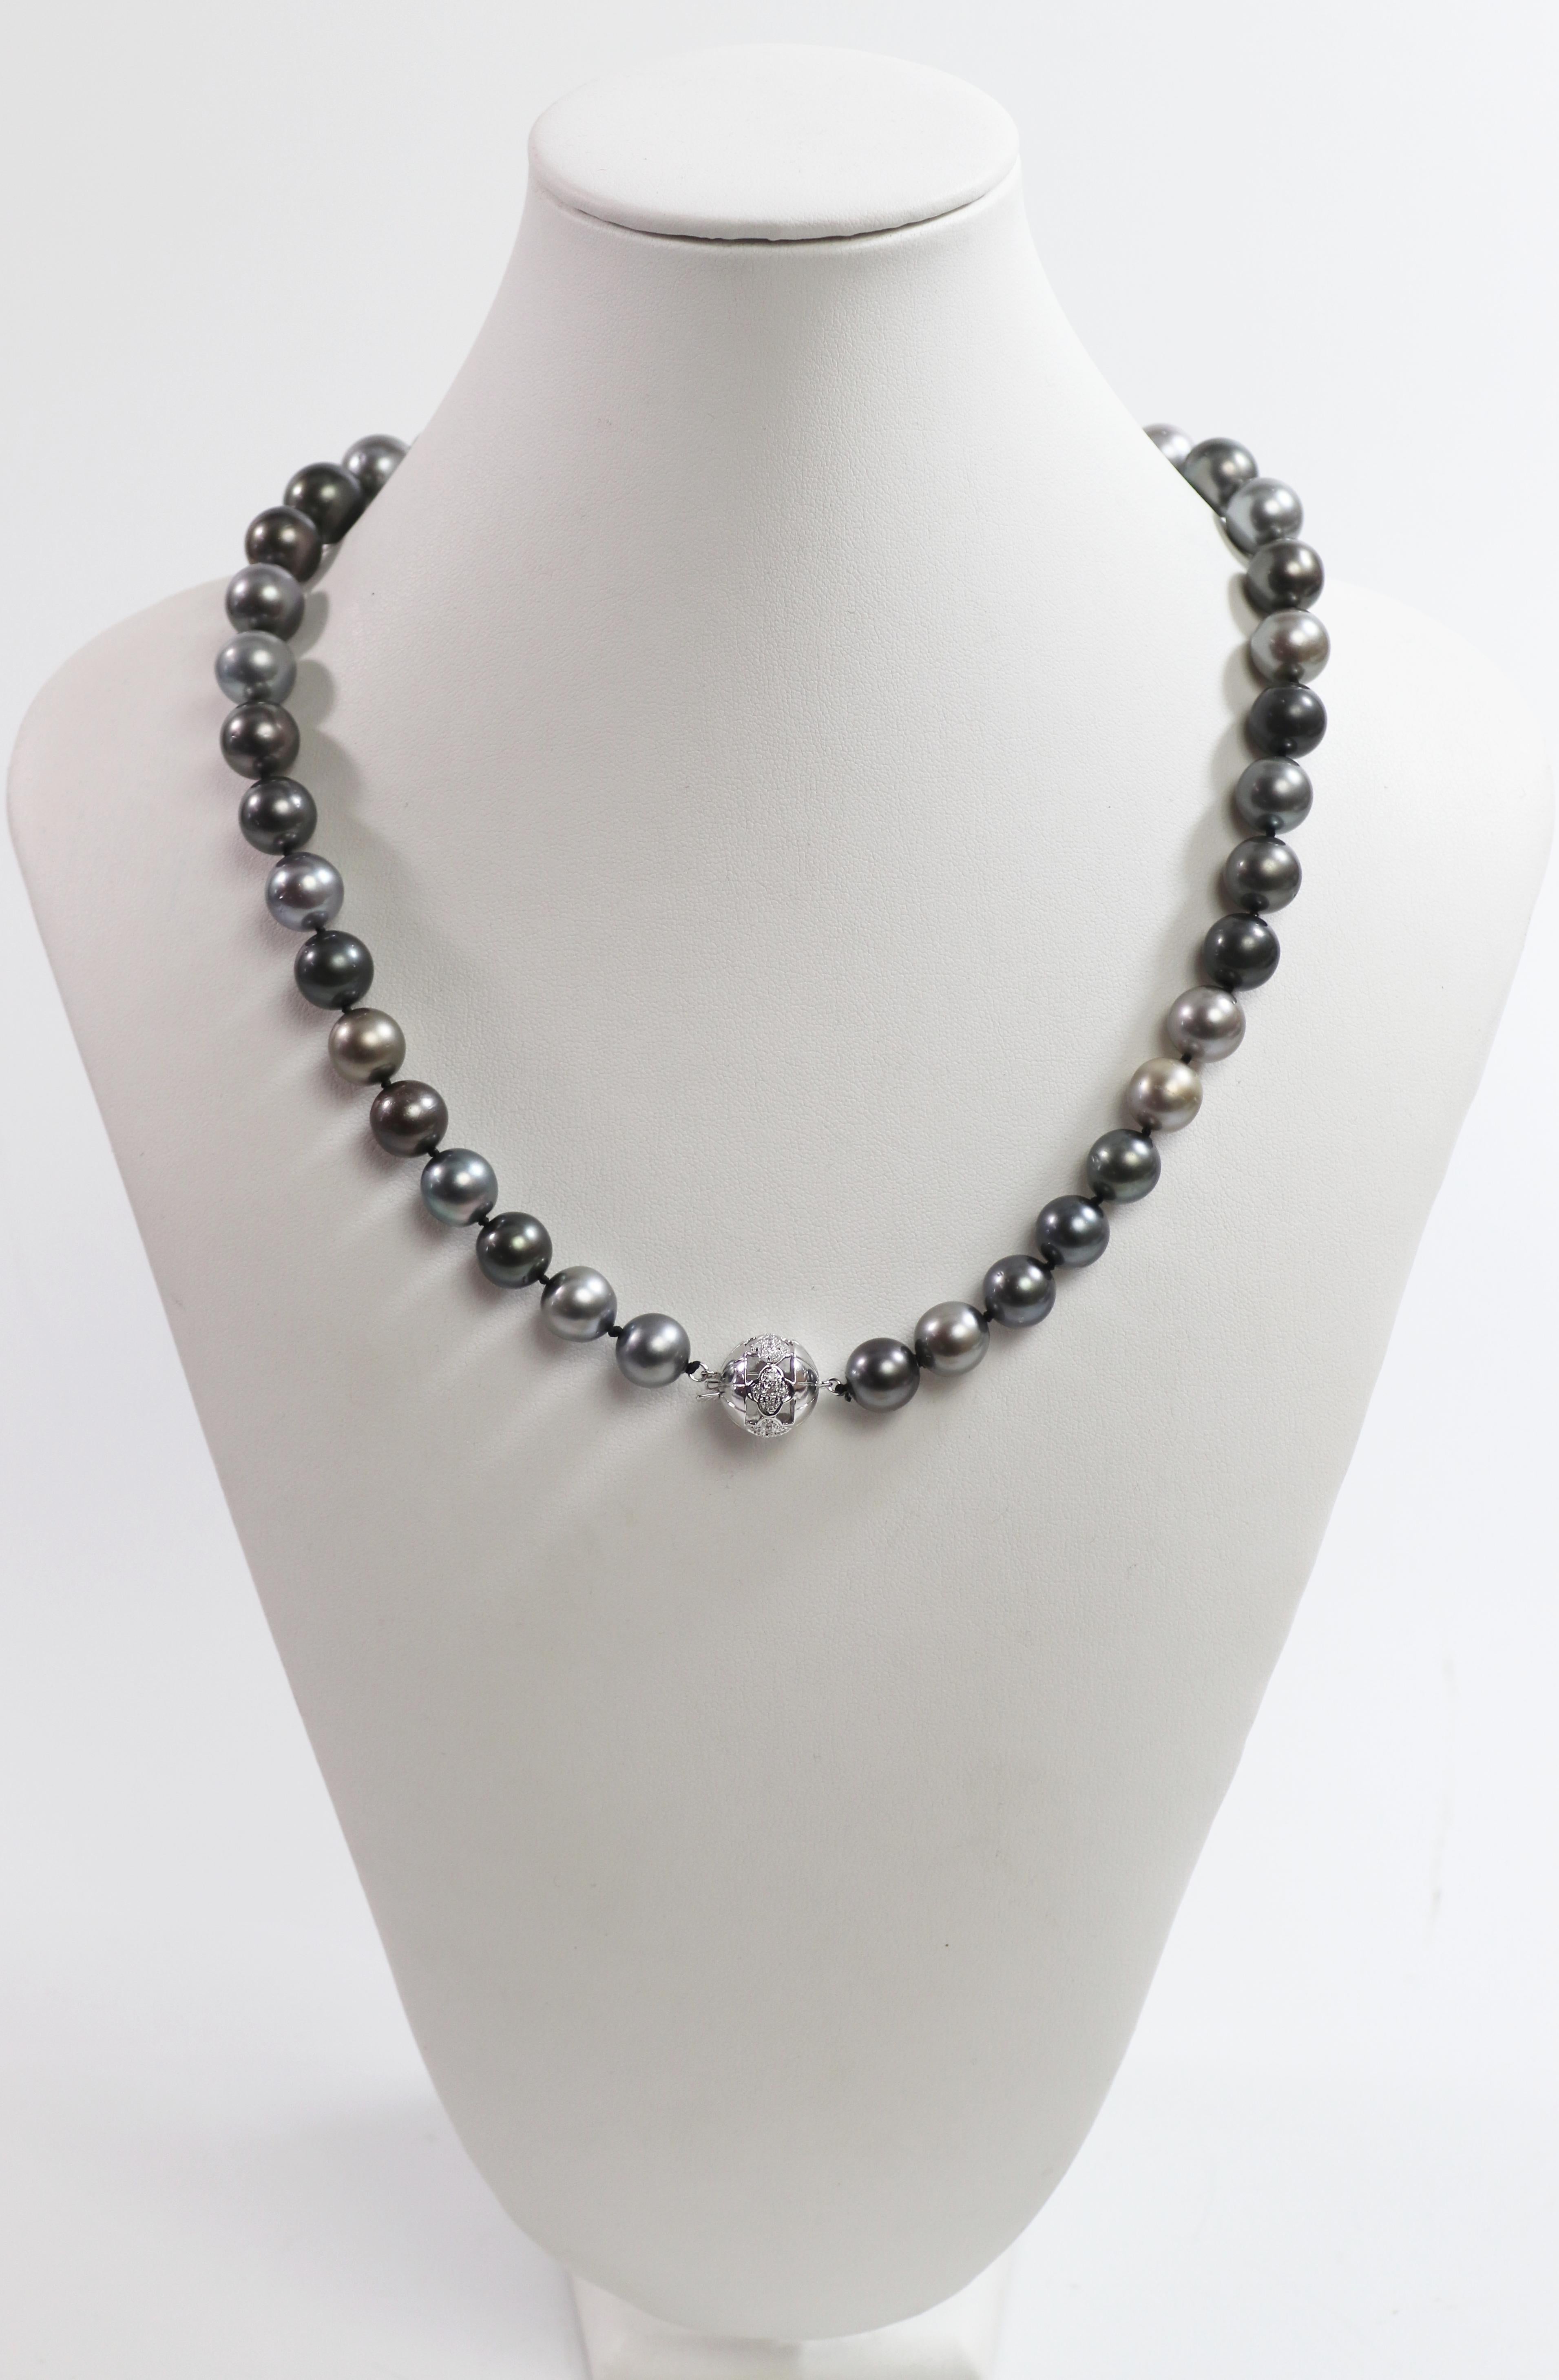 Composed of (40) mostly round, graduated Tahitian grey, black, silver and
grey cultured pearls, 14.5 mm to 10.5 mm, with fine silver to peacock
overtones, very good luster, minimal blemishes, completed by a 14 mm,
18k white gold flower motif ball